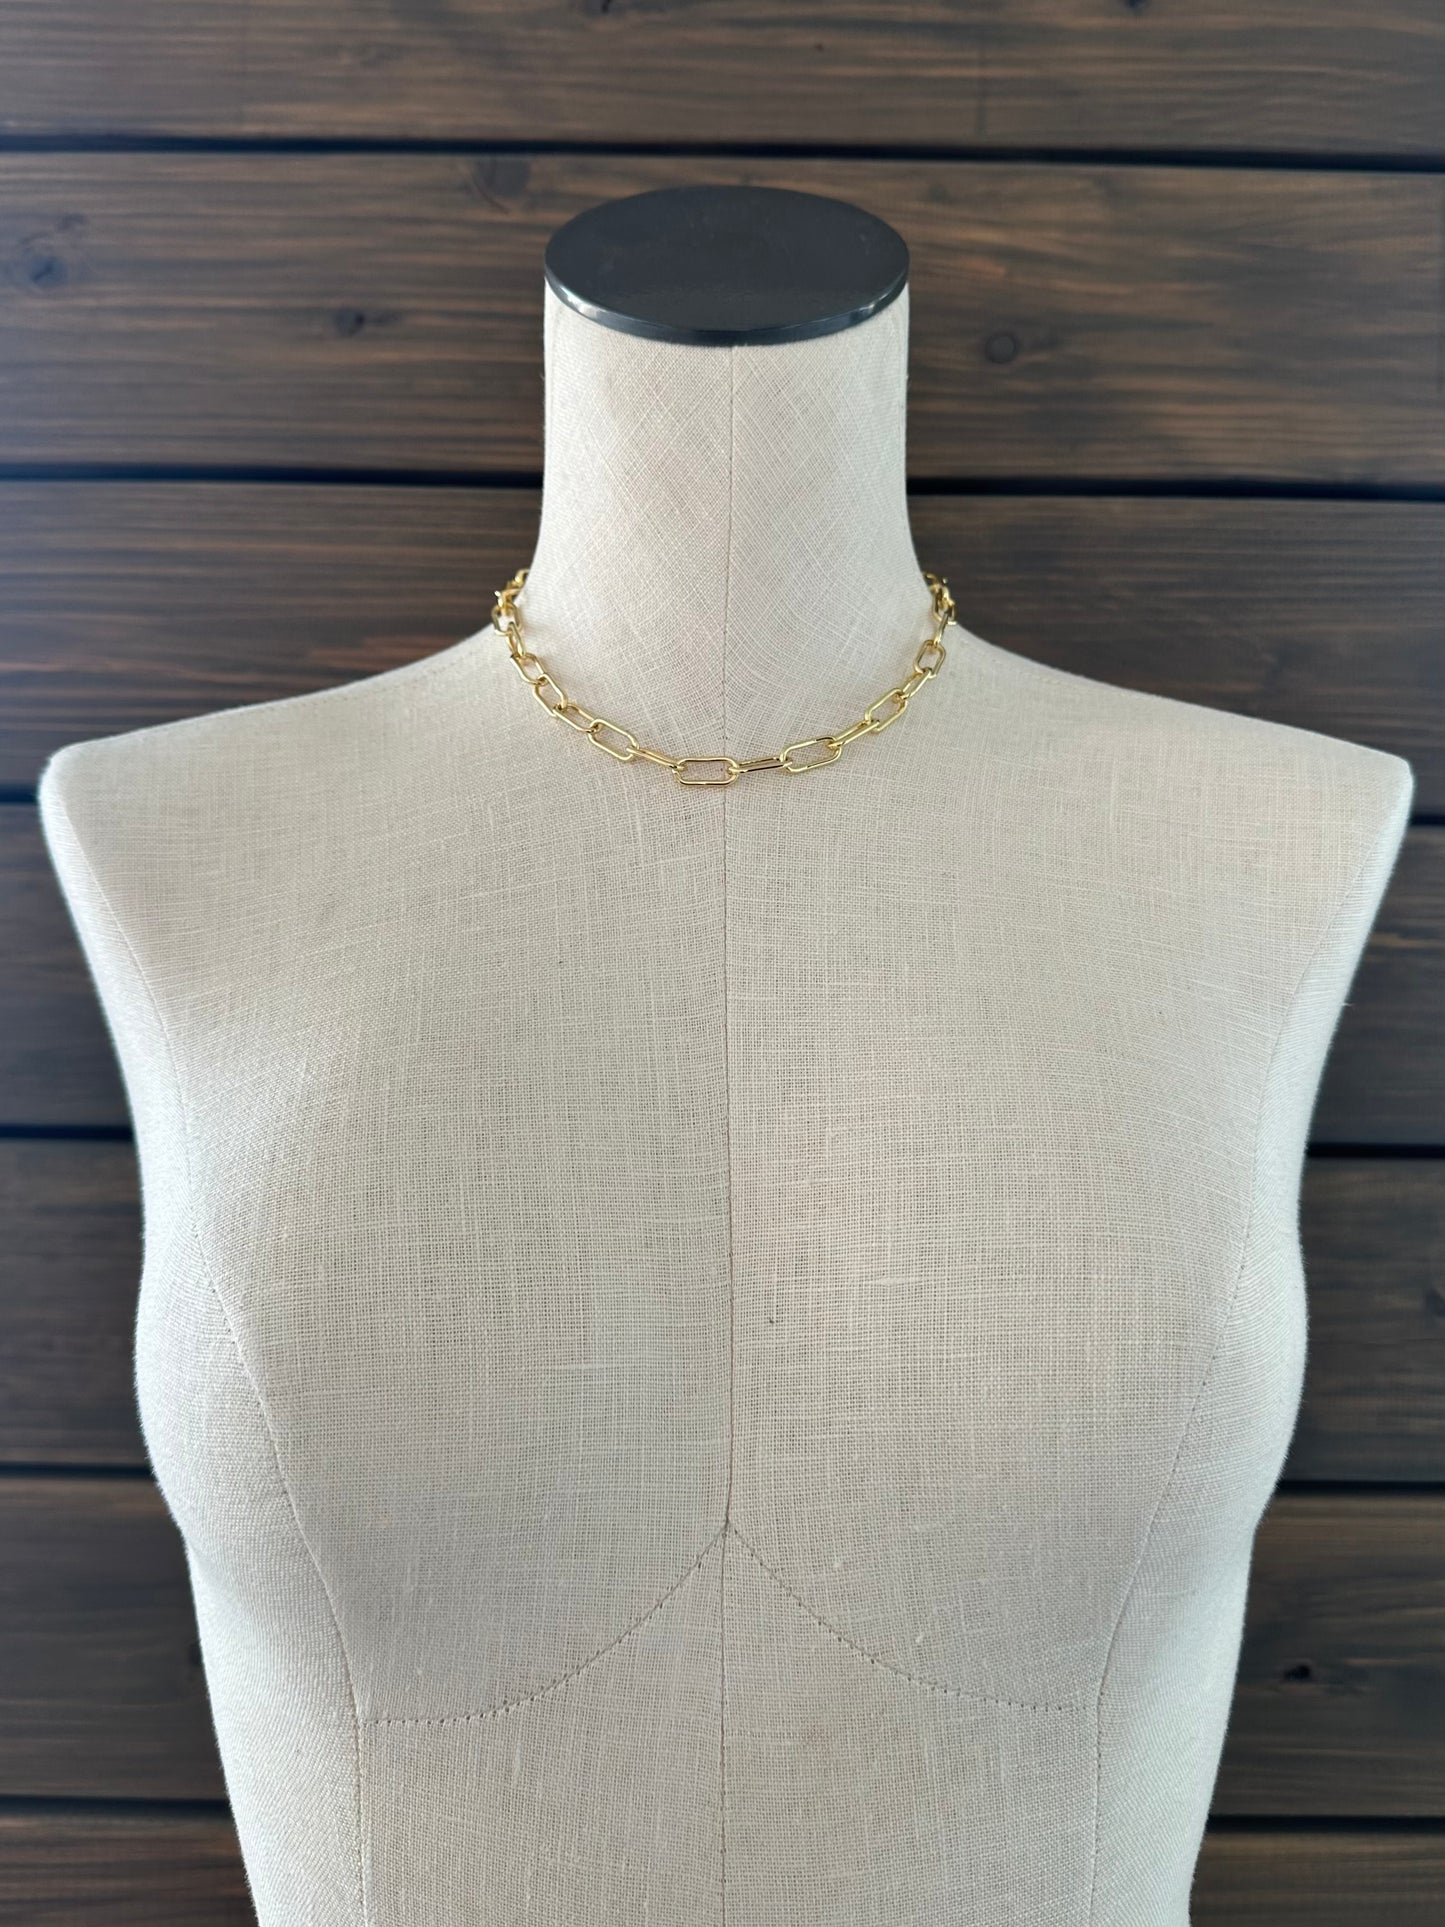 Queen necklace // Chunky paperclip chain